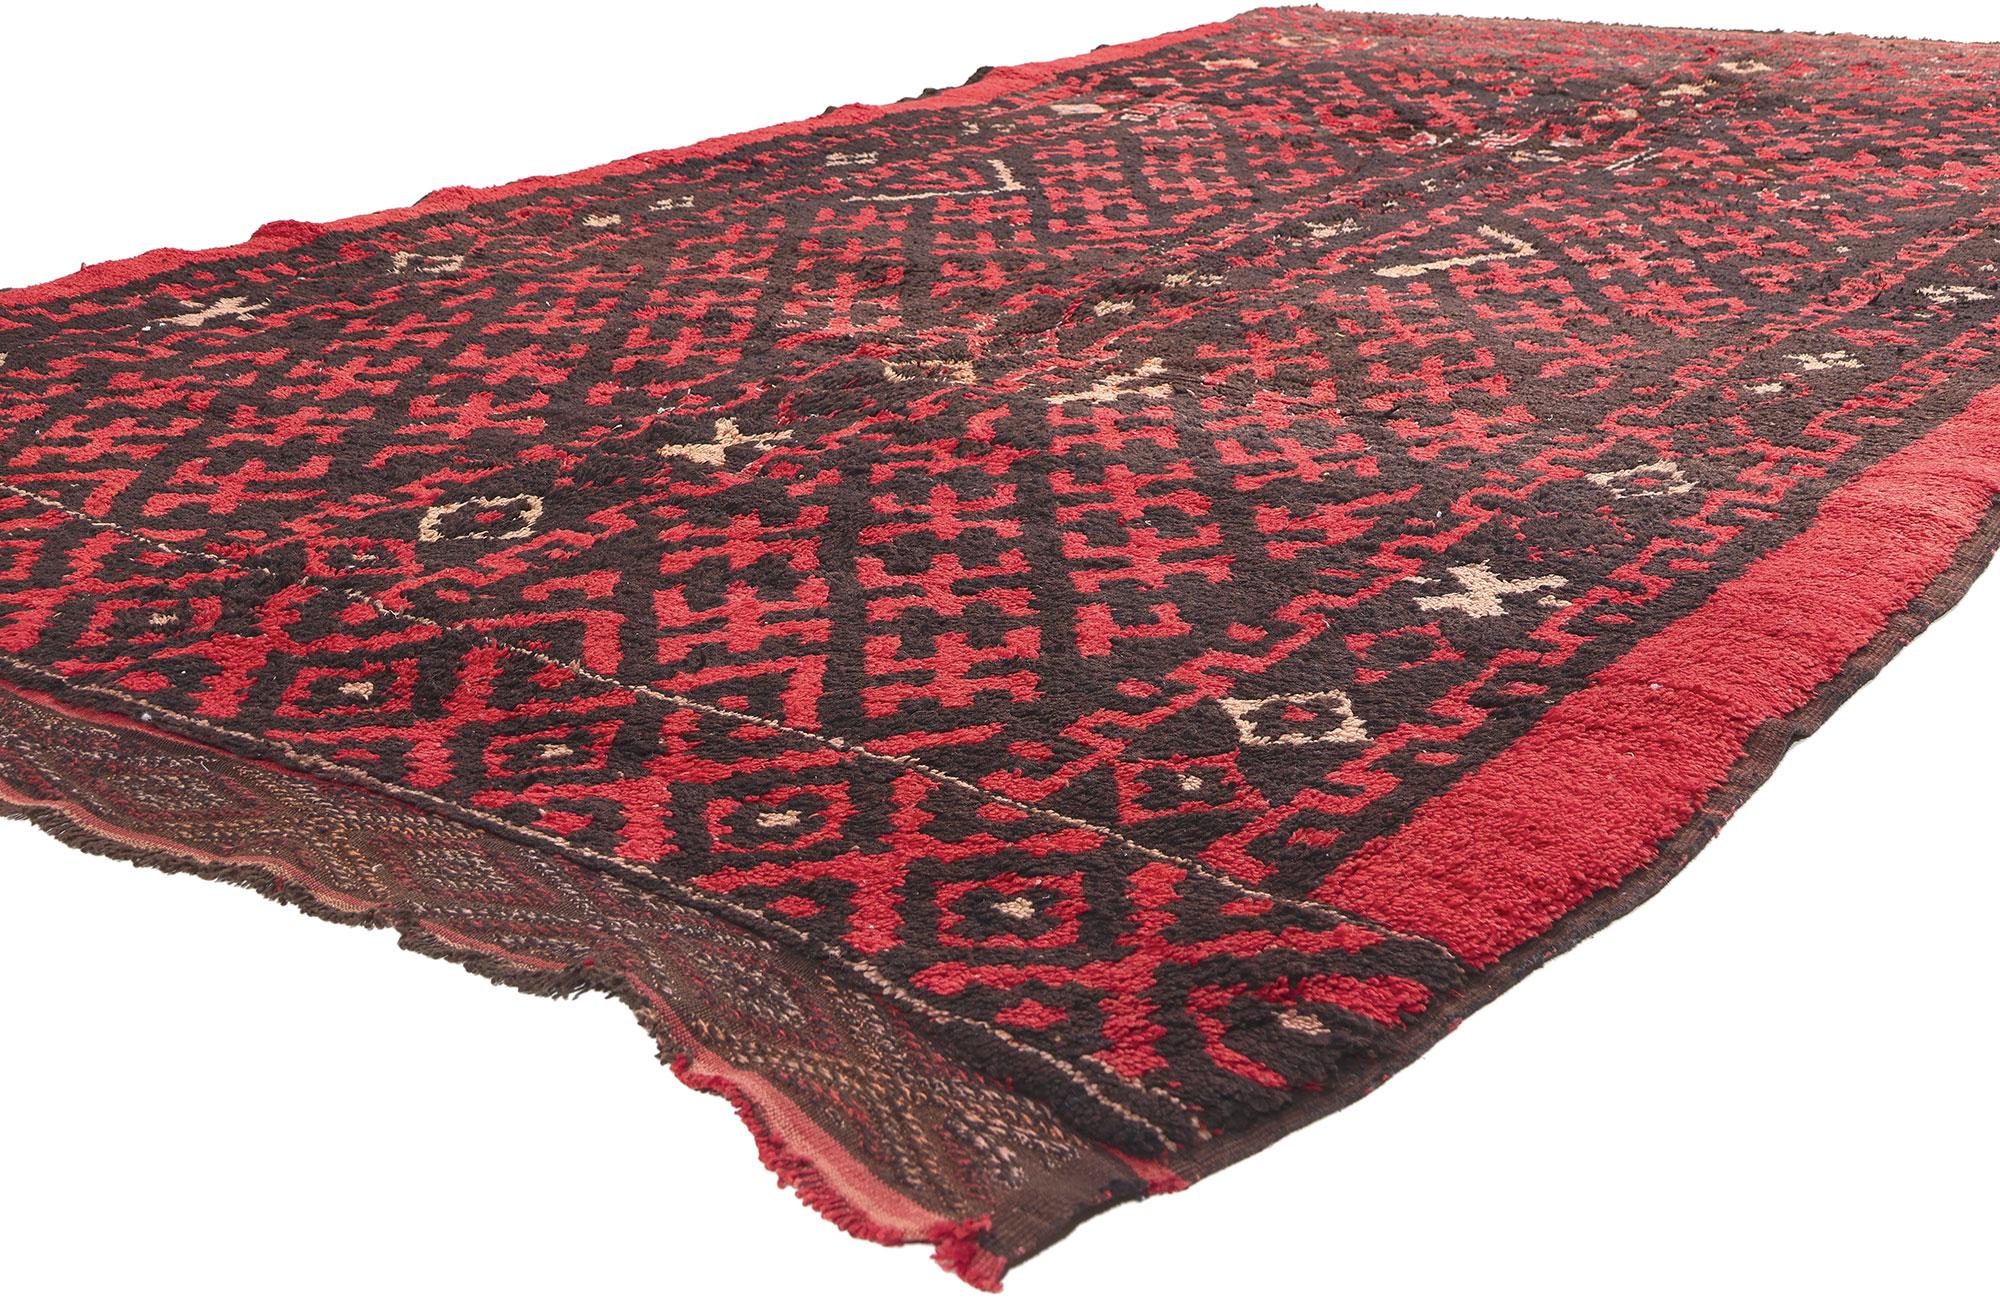 20182 Vintage Taznakht Moroccan Rug, 05'08 x 09'06. Embark on a journey into the rich legacy of the Taznakht Tribe, where skilled hands in the High Atlas Mountains of southern Morocco crafted this hand-knotted wool vintage Moroccan rug—an exquisite